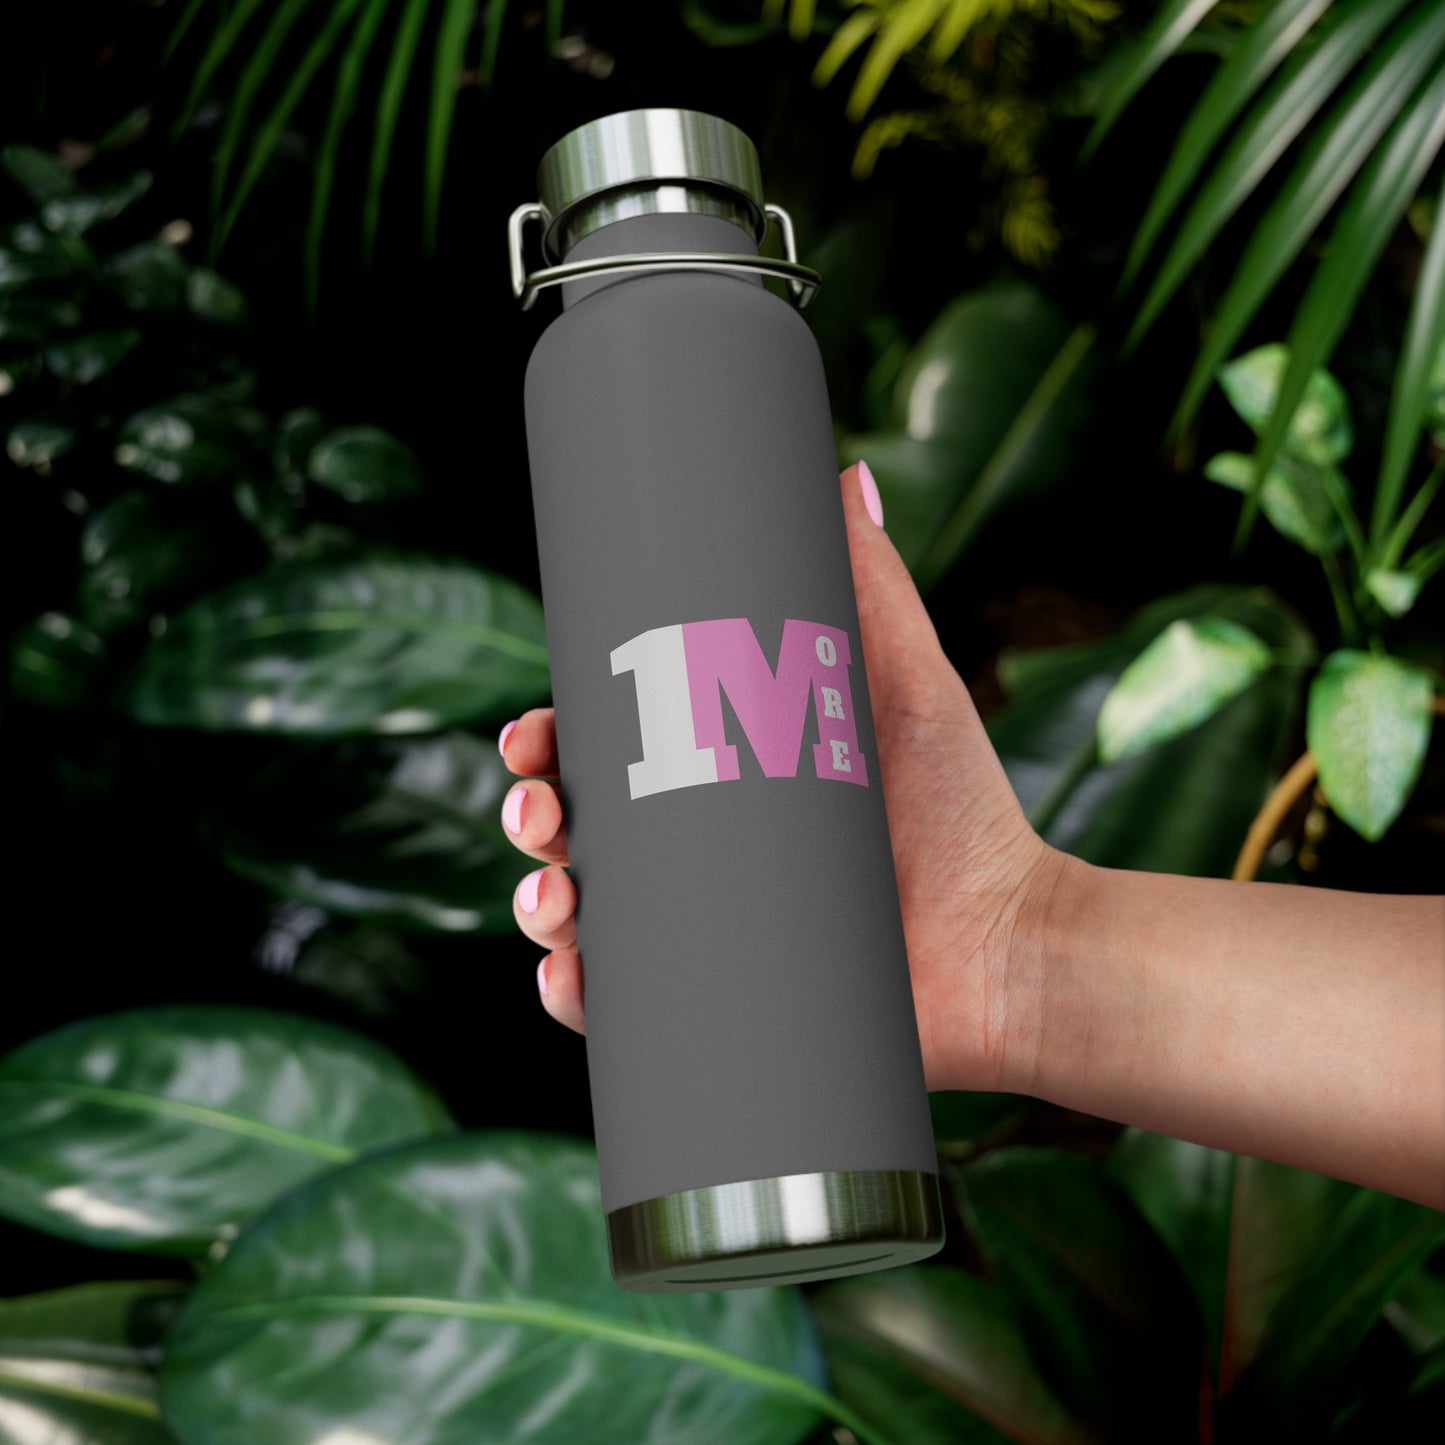 PINK 1M COPPER VACUME INSULATED BOTTLE, 22OZ